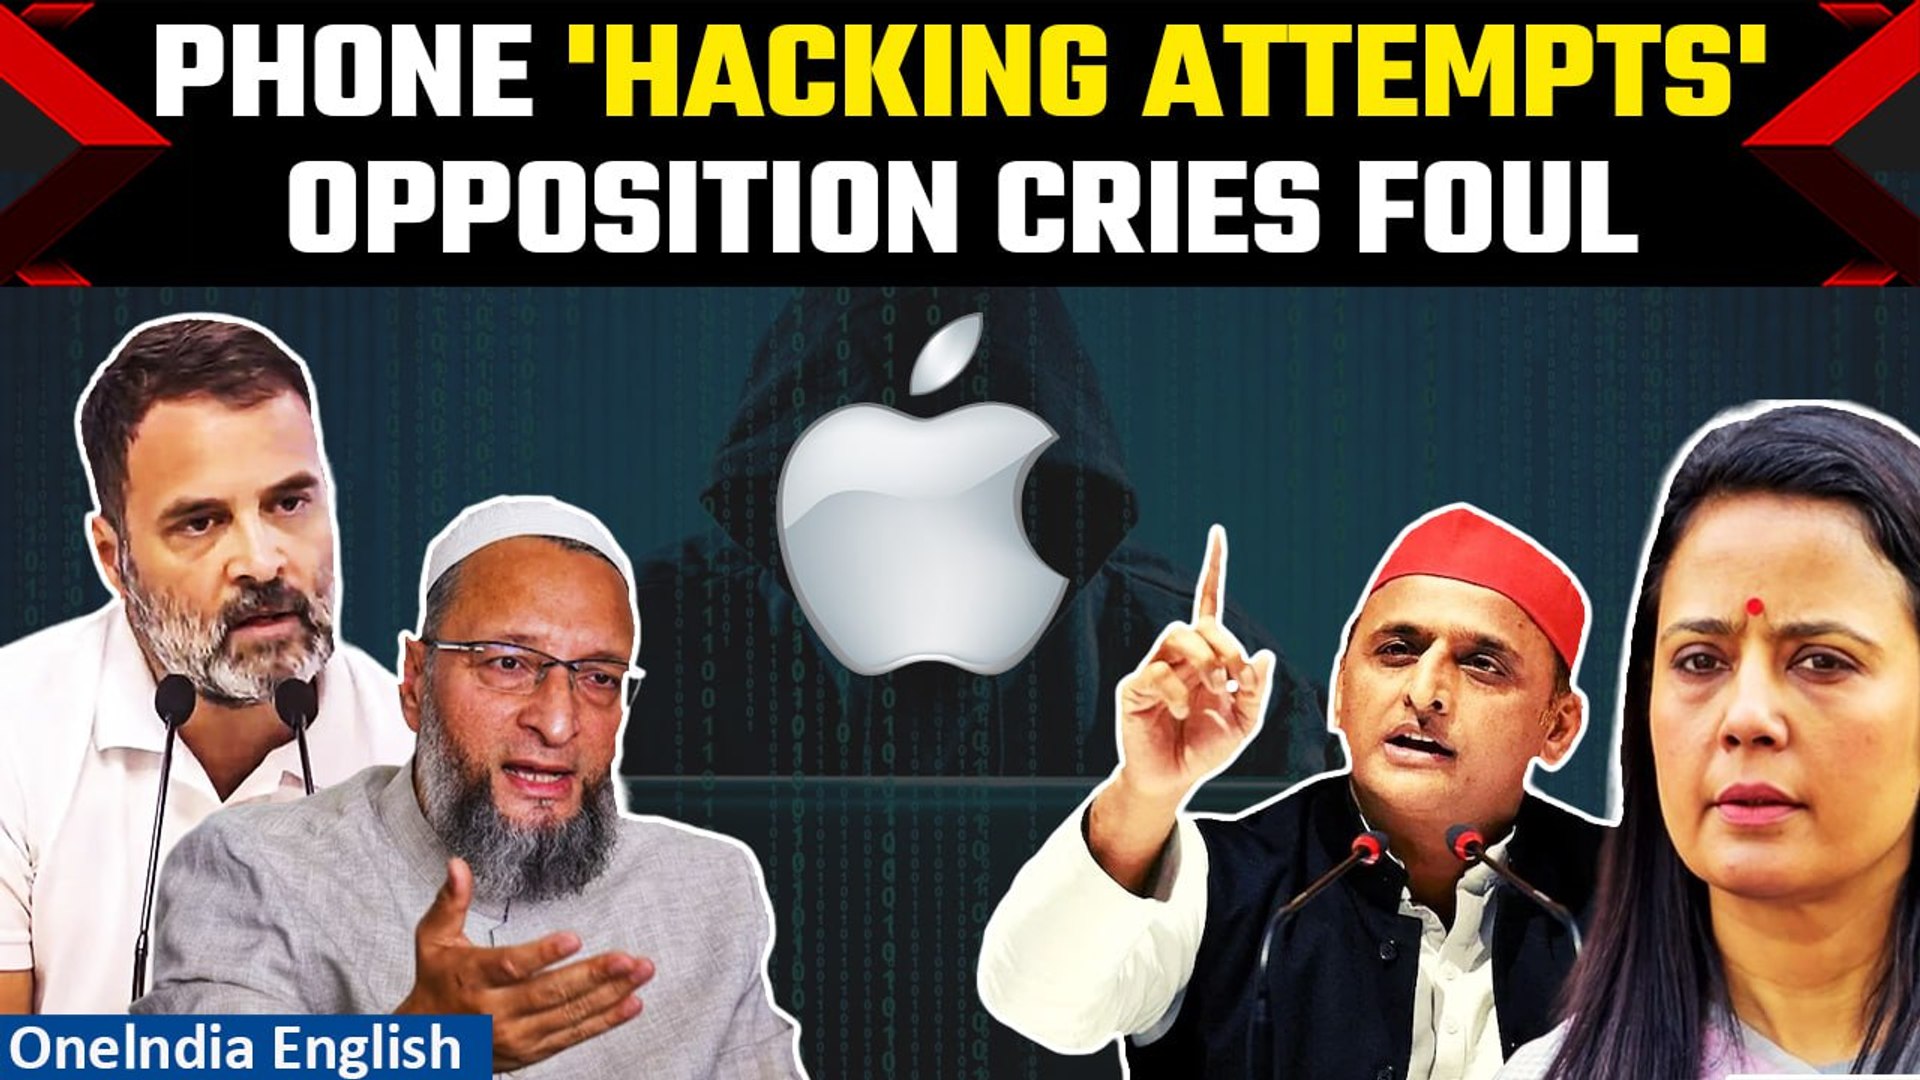 State-sponsored Attackers': Opposition Leaders Allege Hacking Attempt